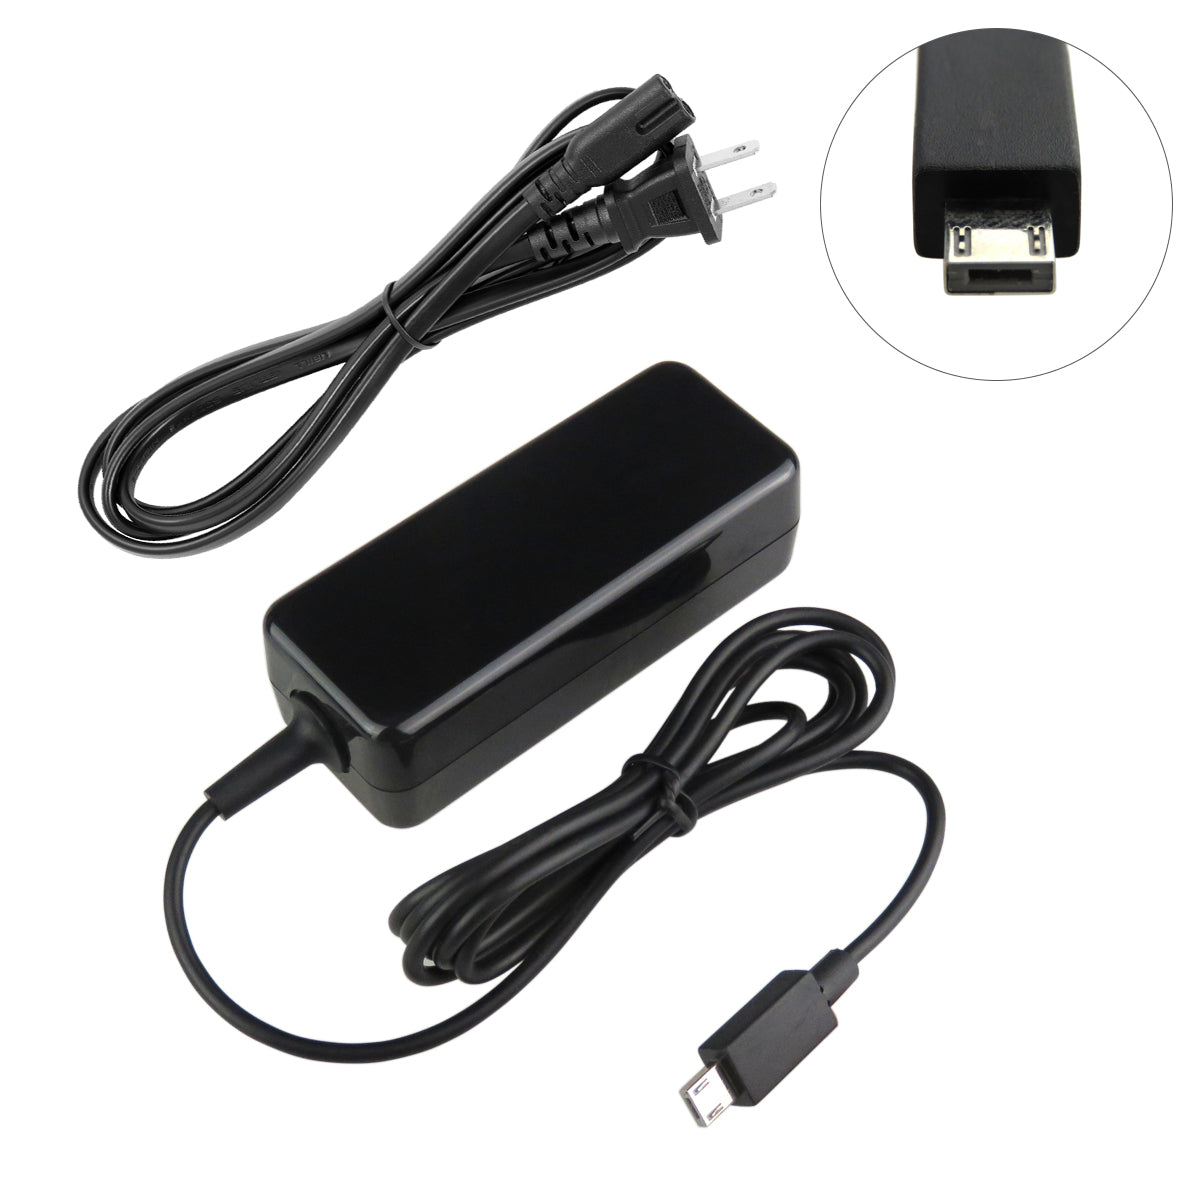 Charger for ASUS EeeBook X205TA-HATM0103 Laptop.